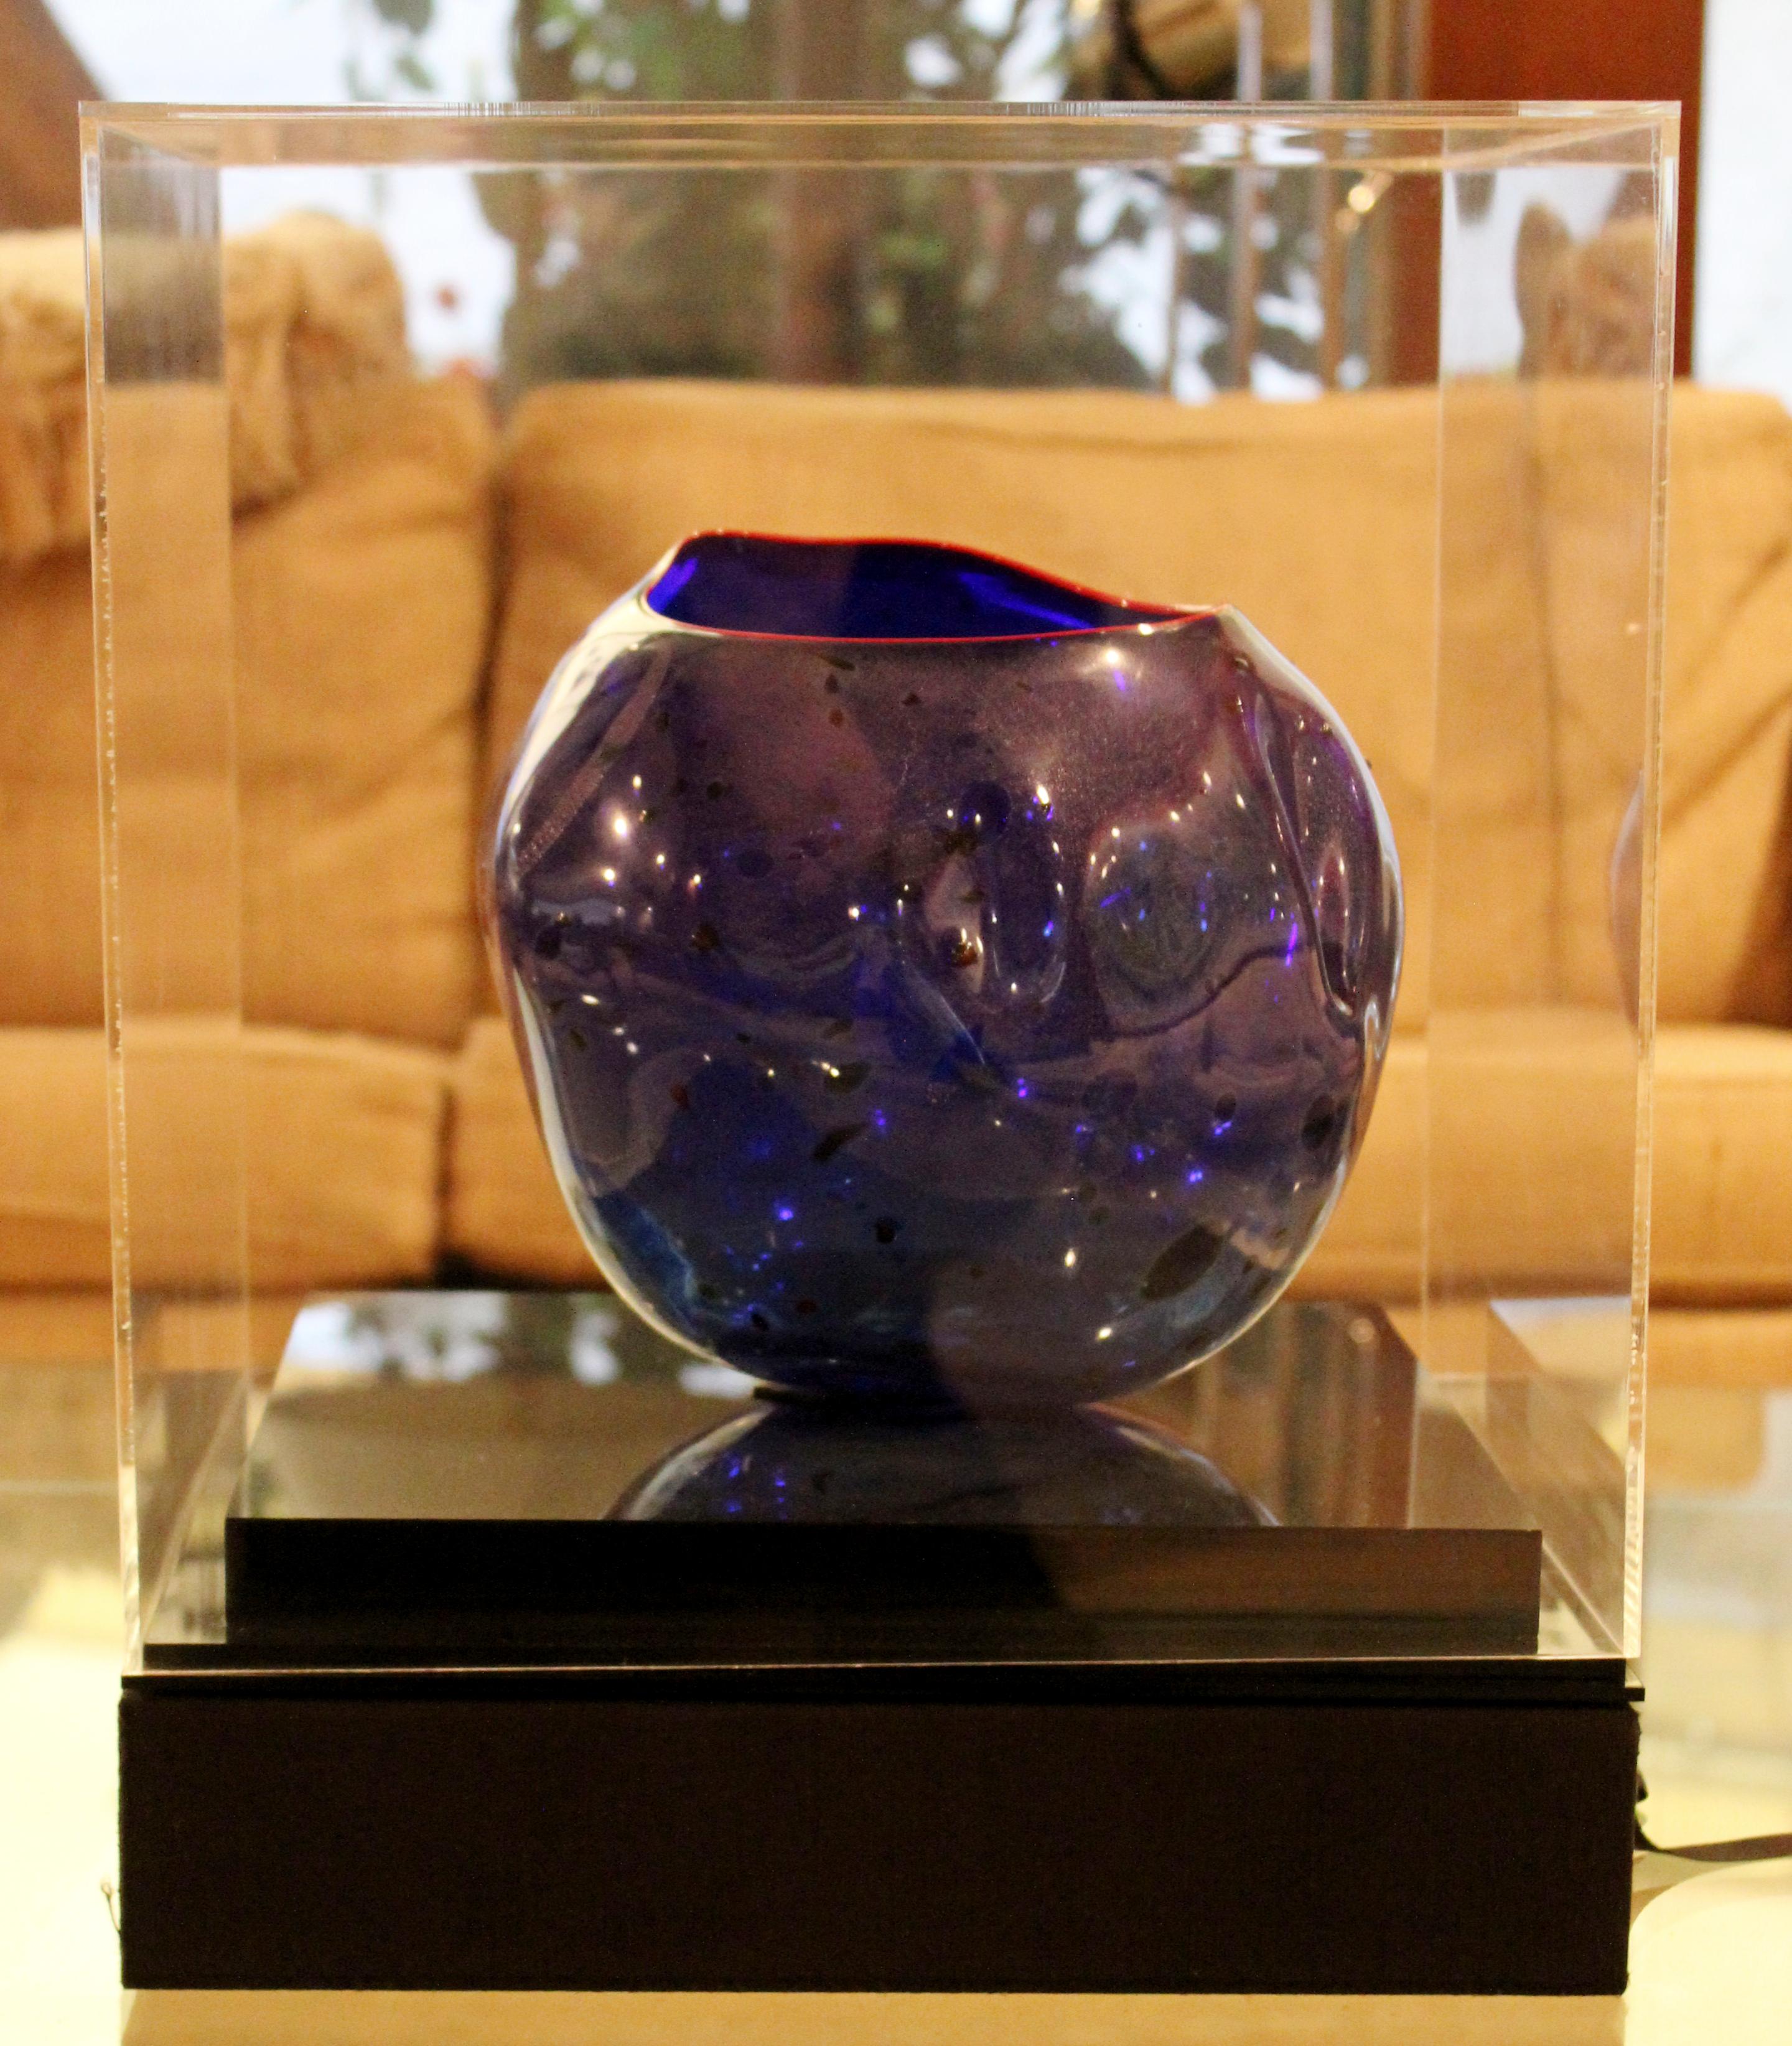 American Mid-Century Modern Shell Glass Art Table Sculpture Signed Chihuly 1990s Blue